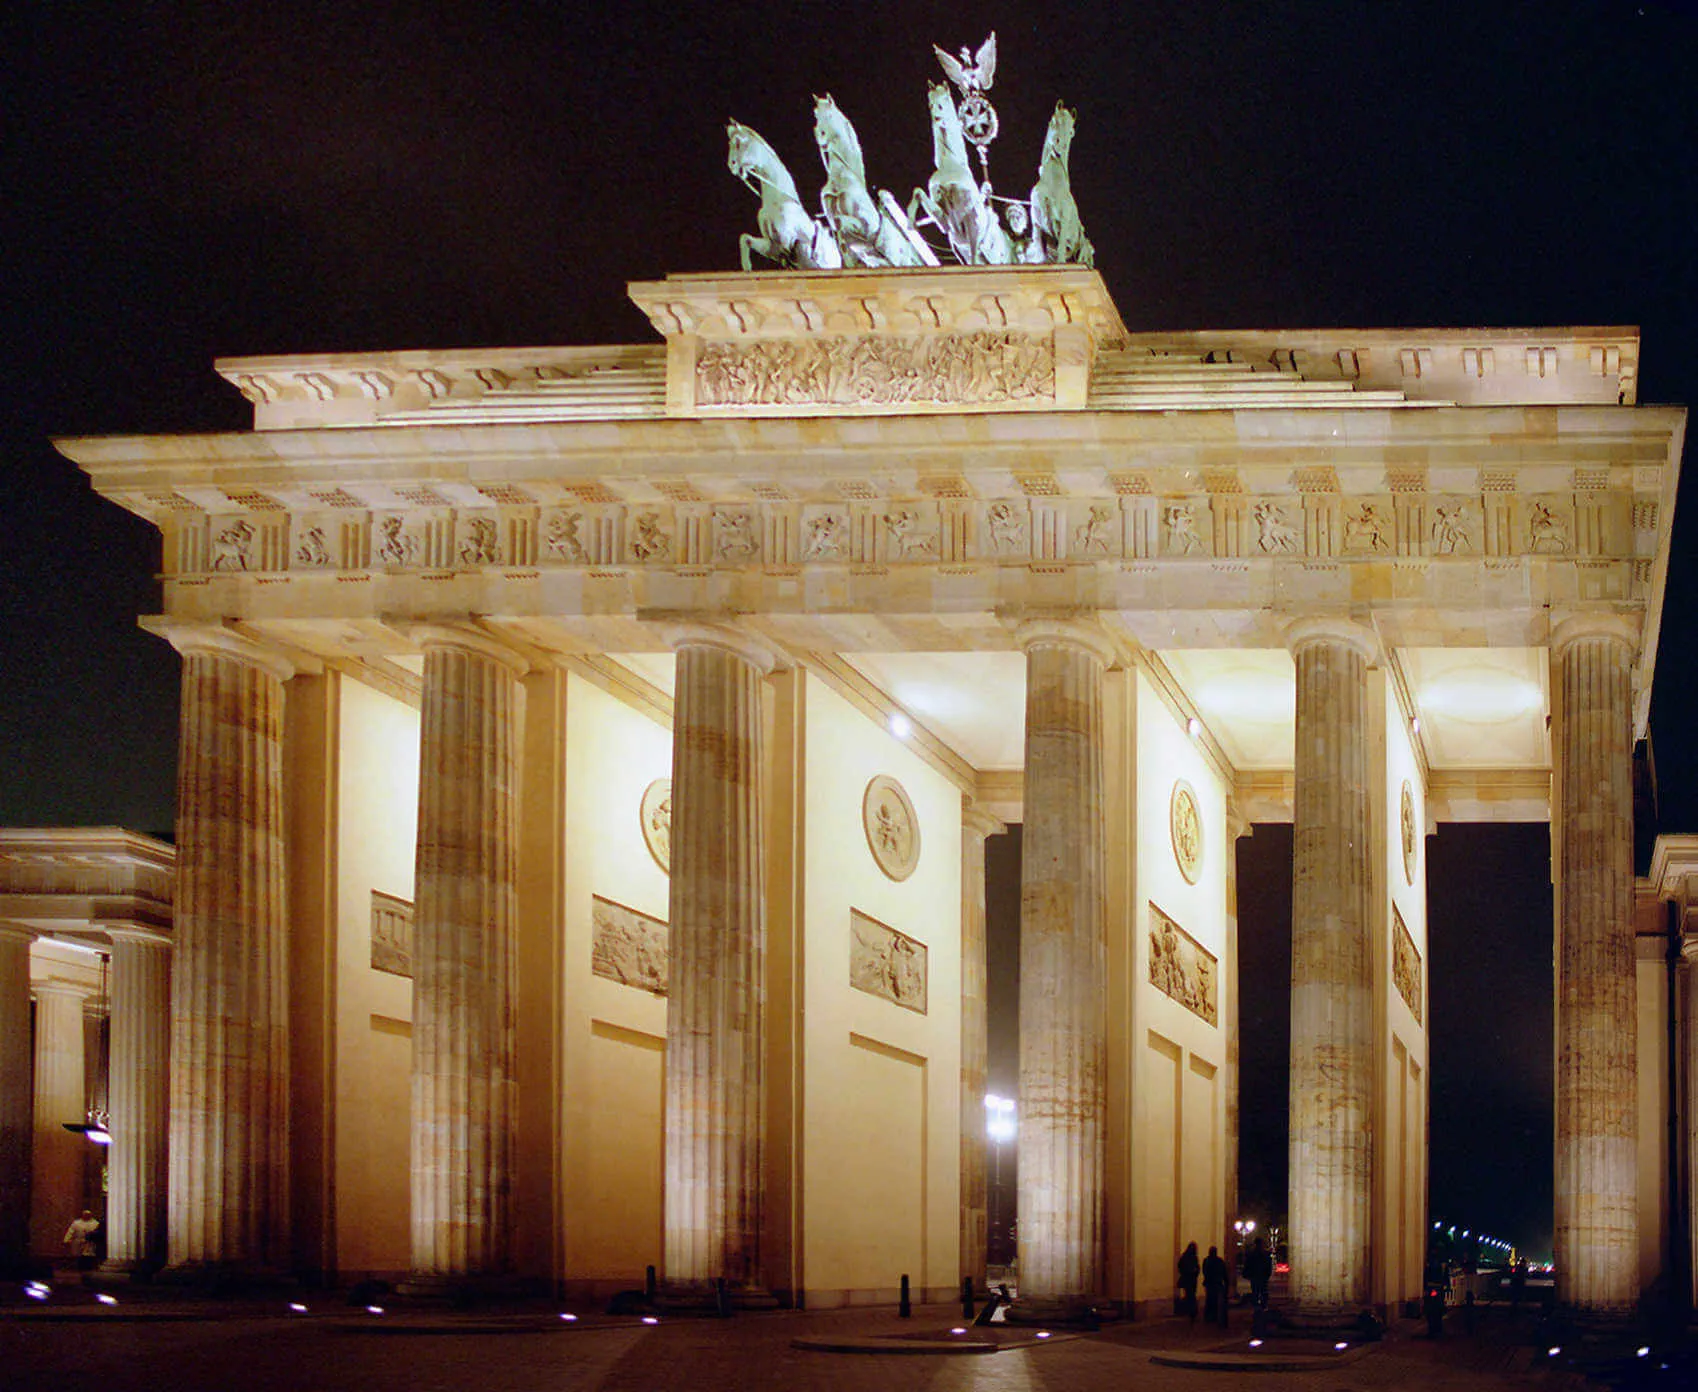 The Brandenburg Gate, which once stood somberly over the no-man's-land of the Berlin Wall, is now a top tourist attraction